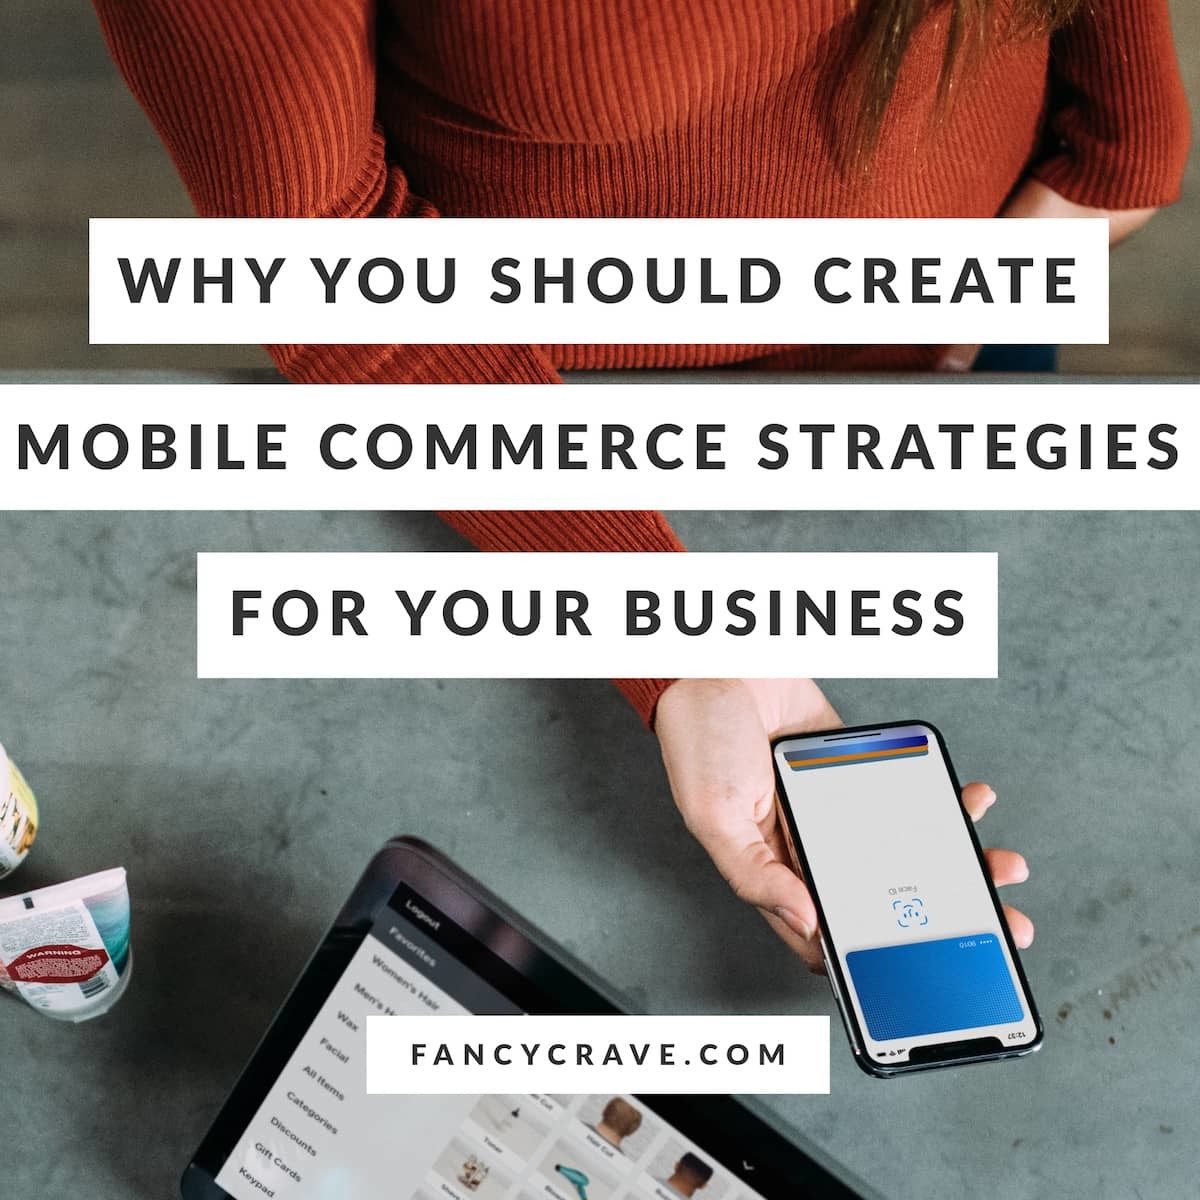 Why You Should Create Mobile Commerce Strategies for Your Business